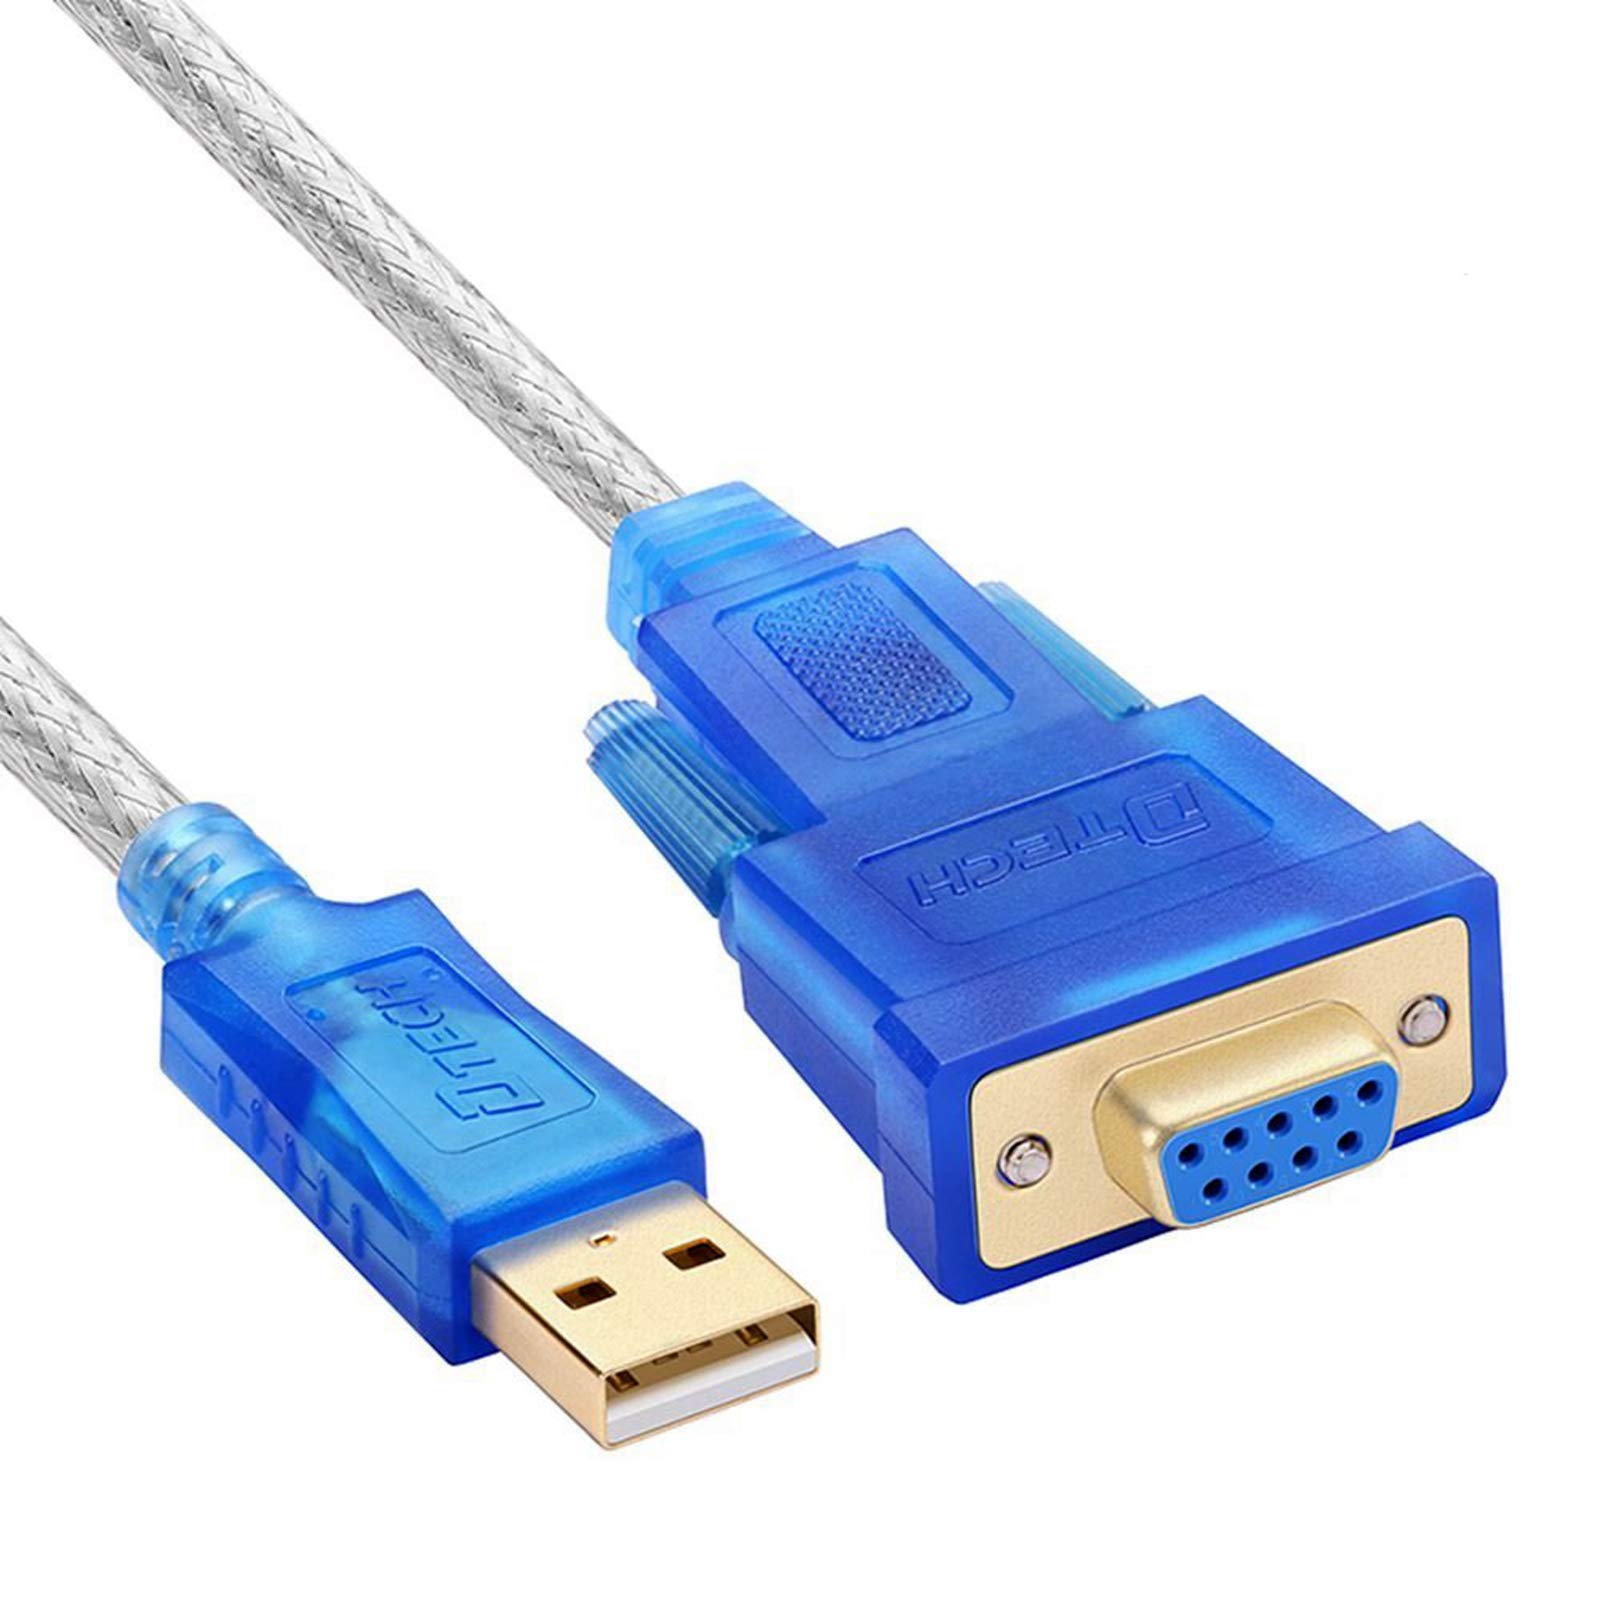 USB 2.0 to RS232 Female DB9 Serial Adapter Cable (Clear Blue) 3 Meters, with CD / PL2303 Chipset/Support 98/ME/2000/2003/2008/Andoid/XP/win7 8 8.1 10/Mac OS/Linux.